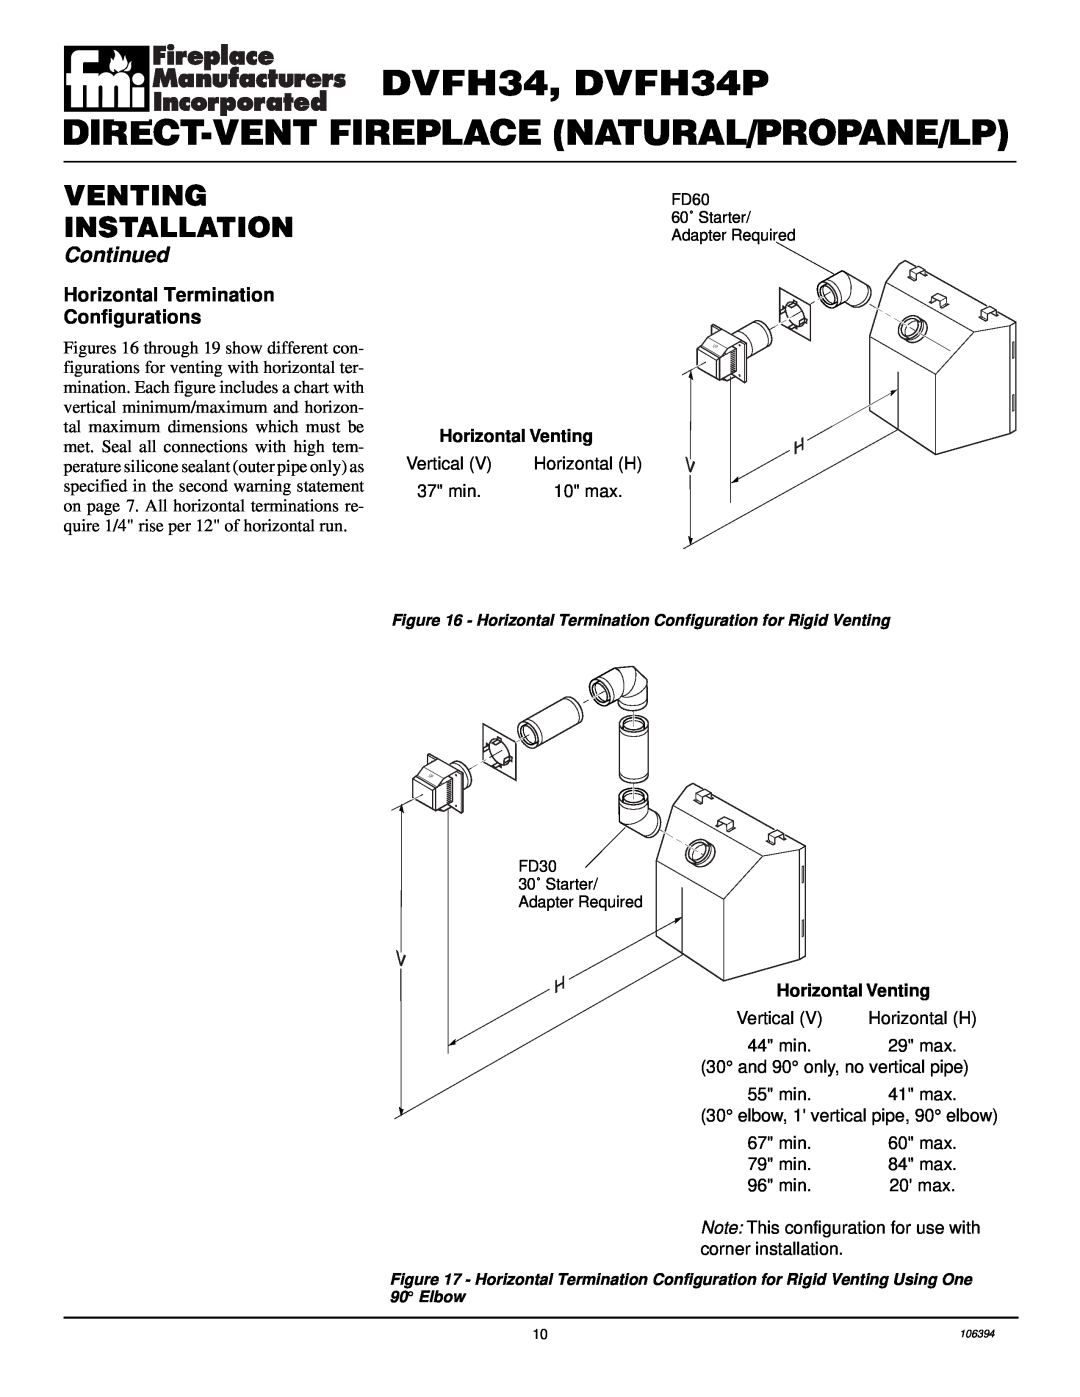 Desa installation manual DVFH34, DVFH34P, Direct-Ventfireplace Natural/Propane/Lp, Venting Installation, Continued 